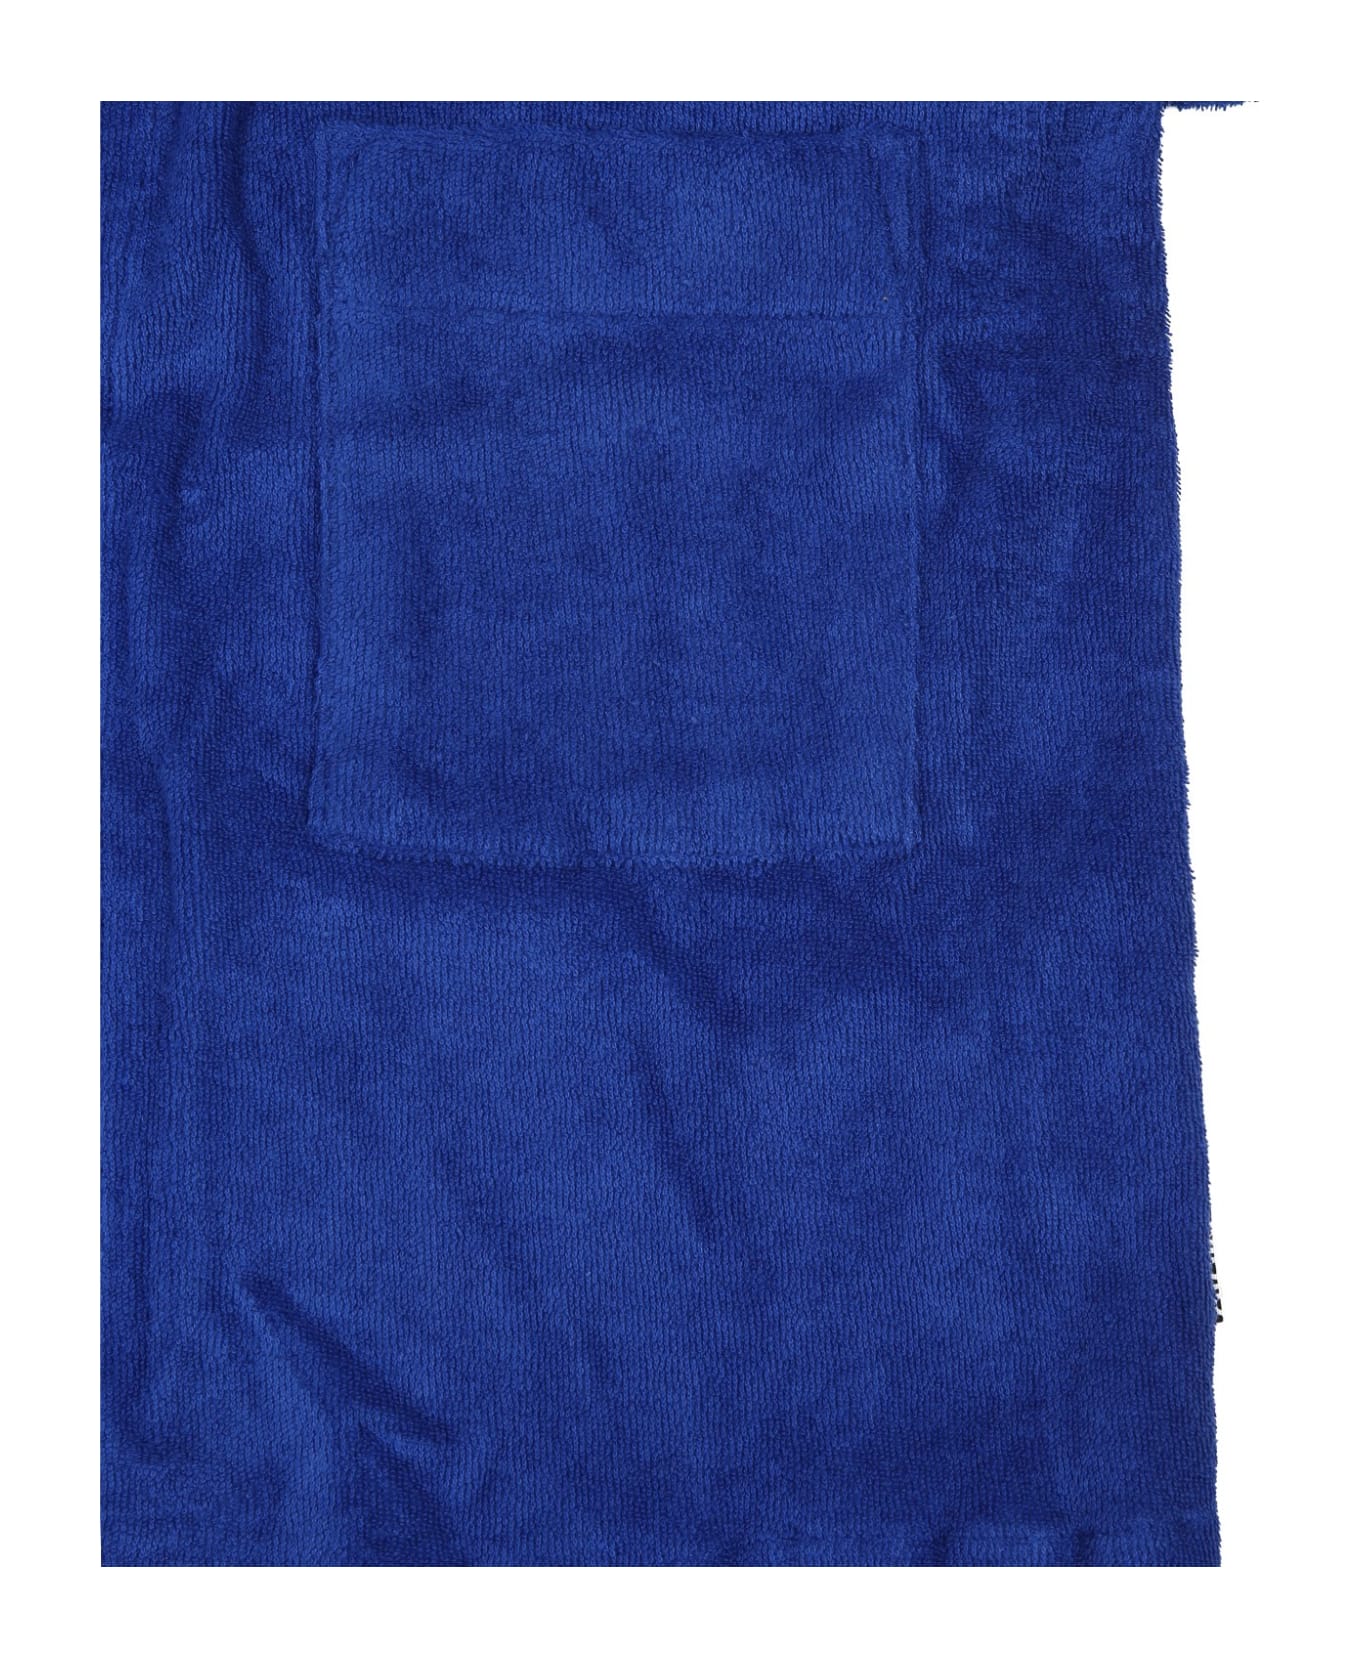 Molo Blue Dressing Gown For Kids - Blue ジャンプスーツ